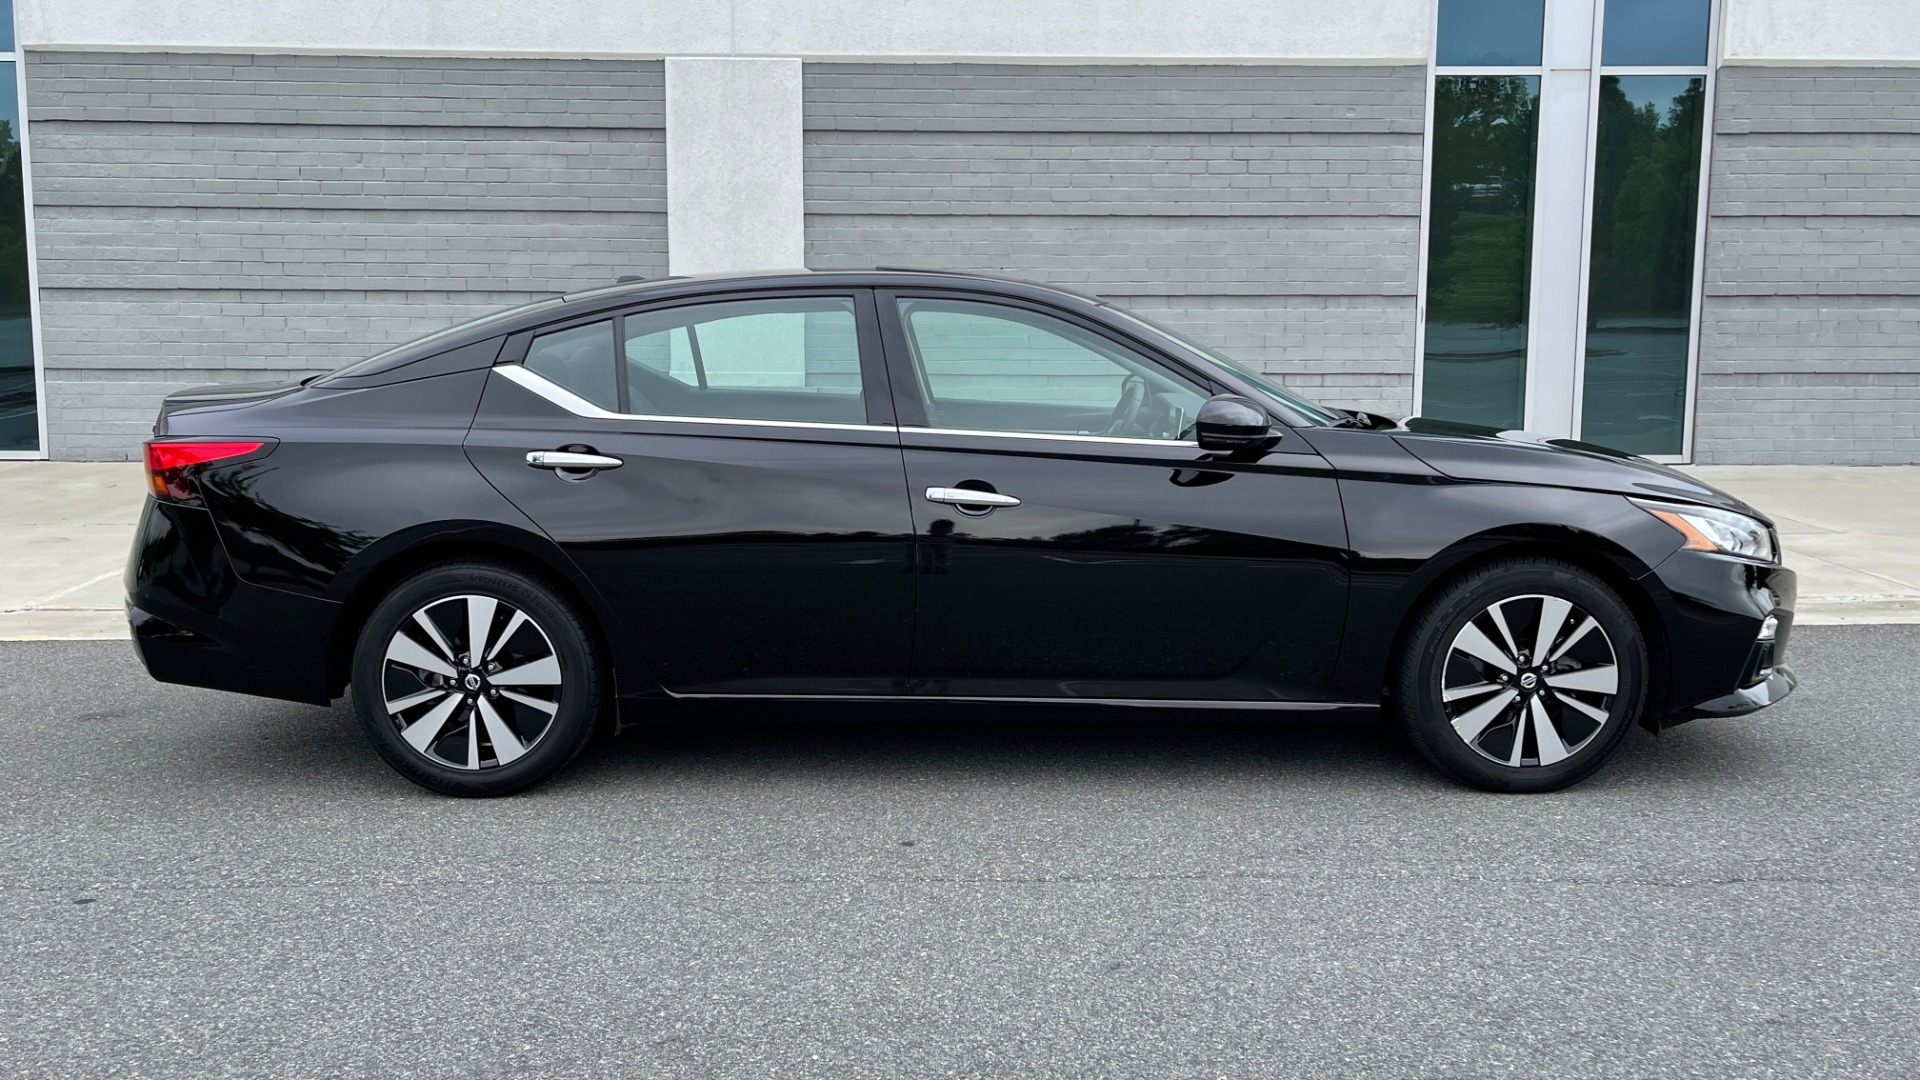 Used 2019 Nissan ALTIMA 2.5 SV SEDAN / CVT TRANS / SUNROOF / REARVIEW / LOW MILES for sale Sold at Formula Imports in Charlotte NC 28227 4